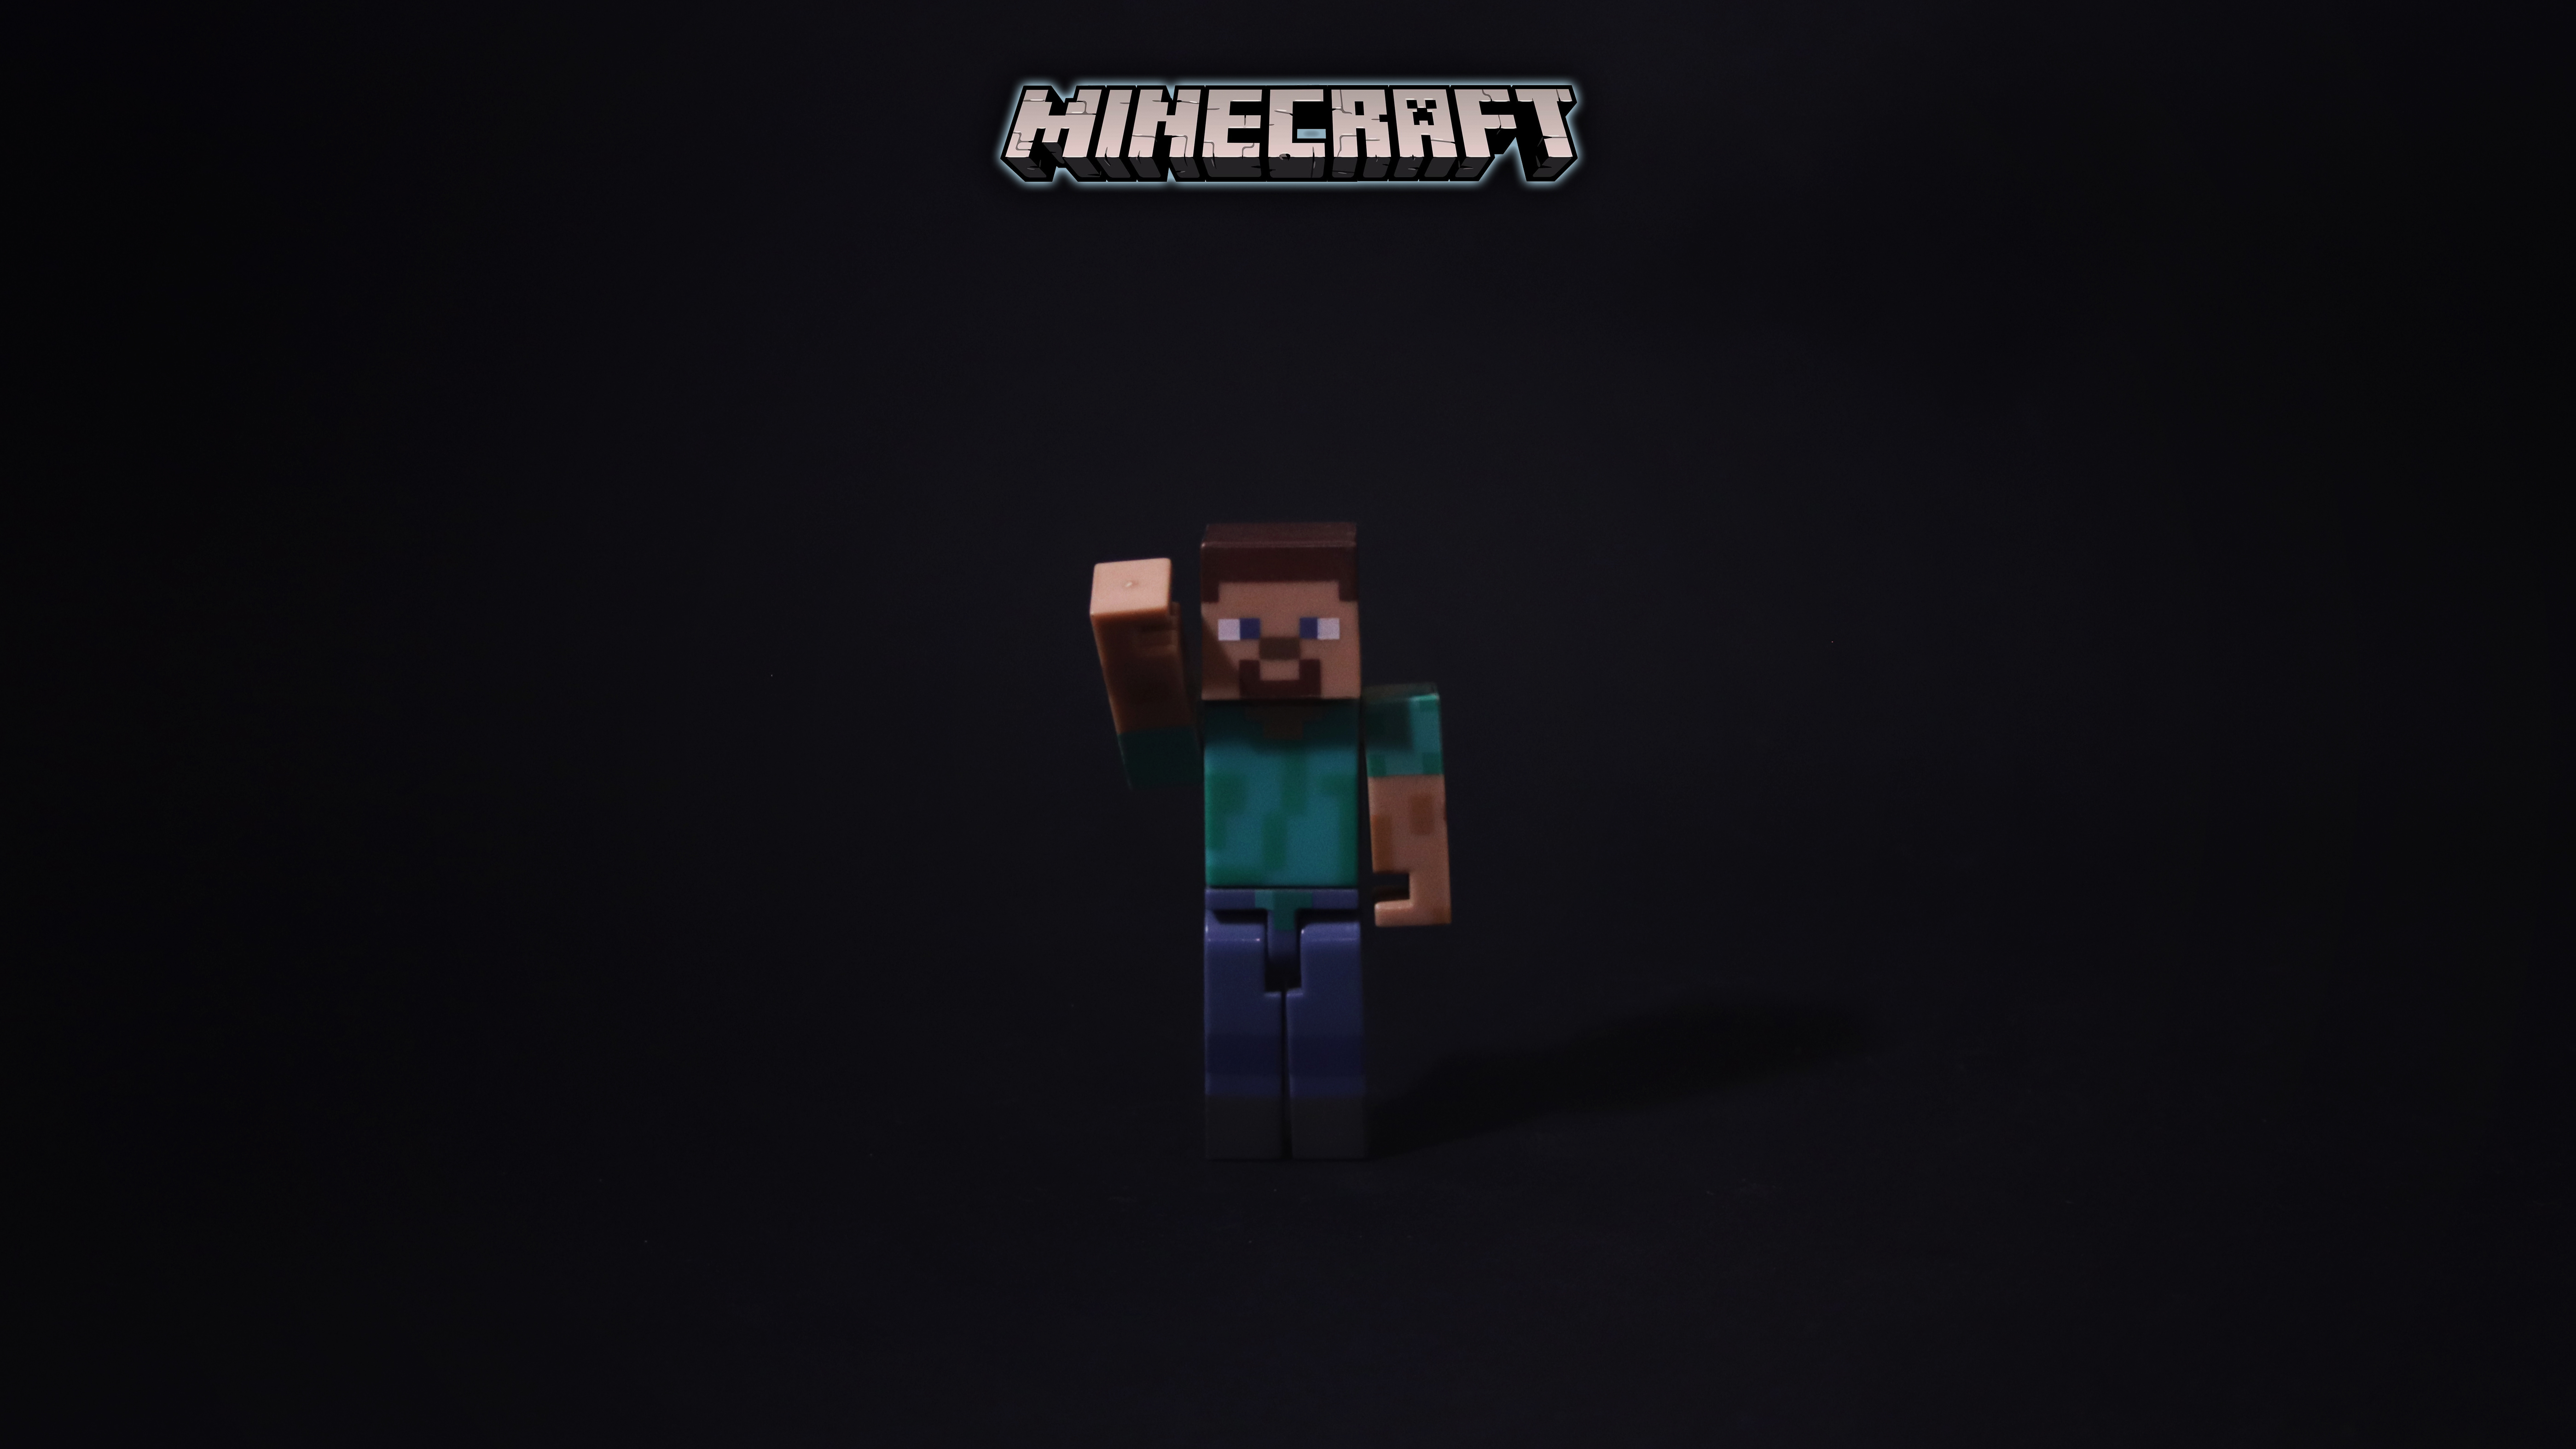 2932x2932 Minecraft Game Ipad Pro Retina Display HD 4k Wallpapers, Images,  Backgrounds, Photos and Pictures